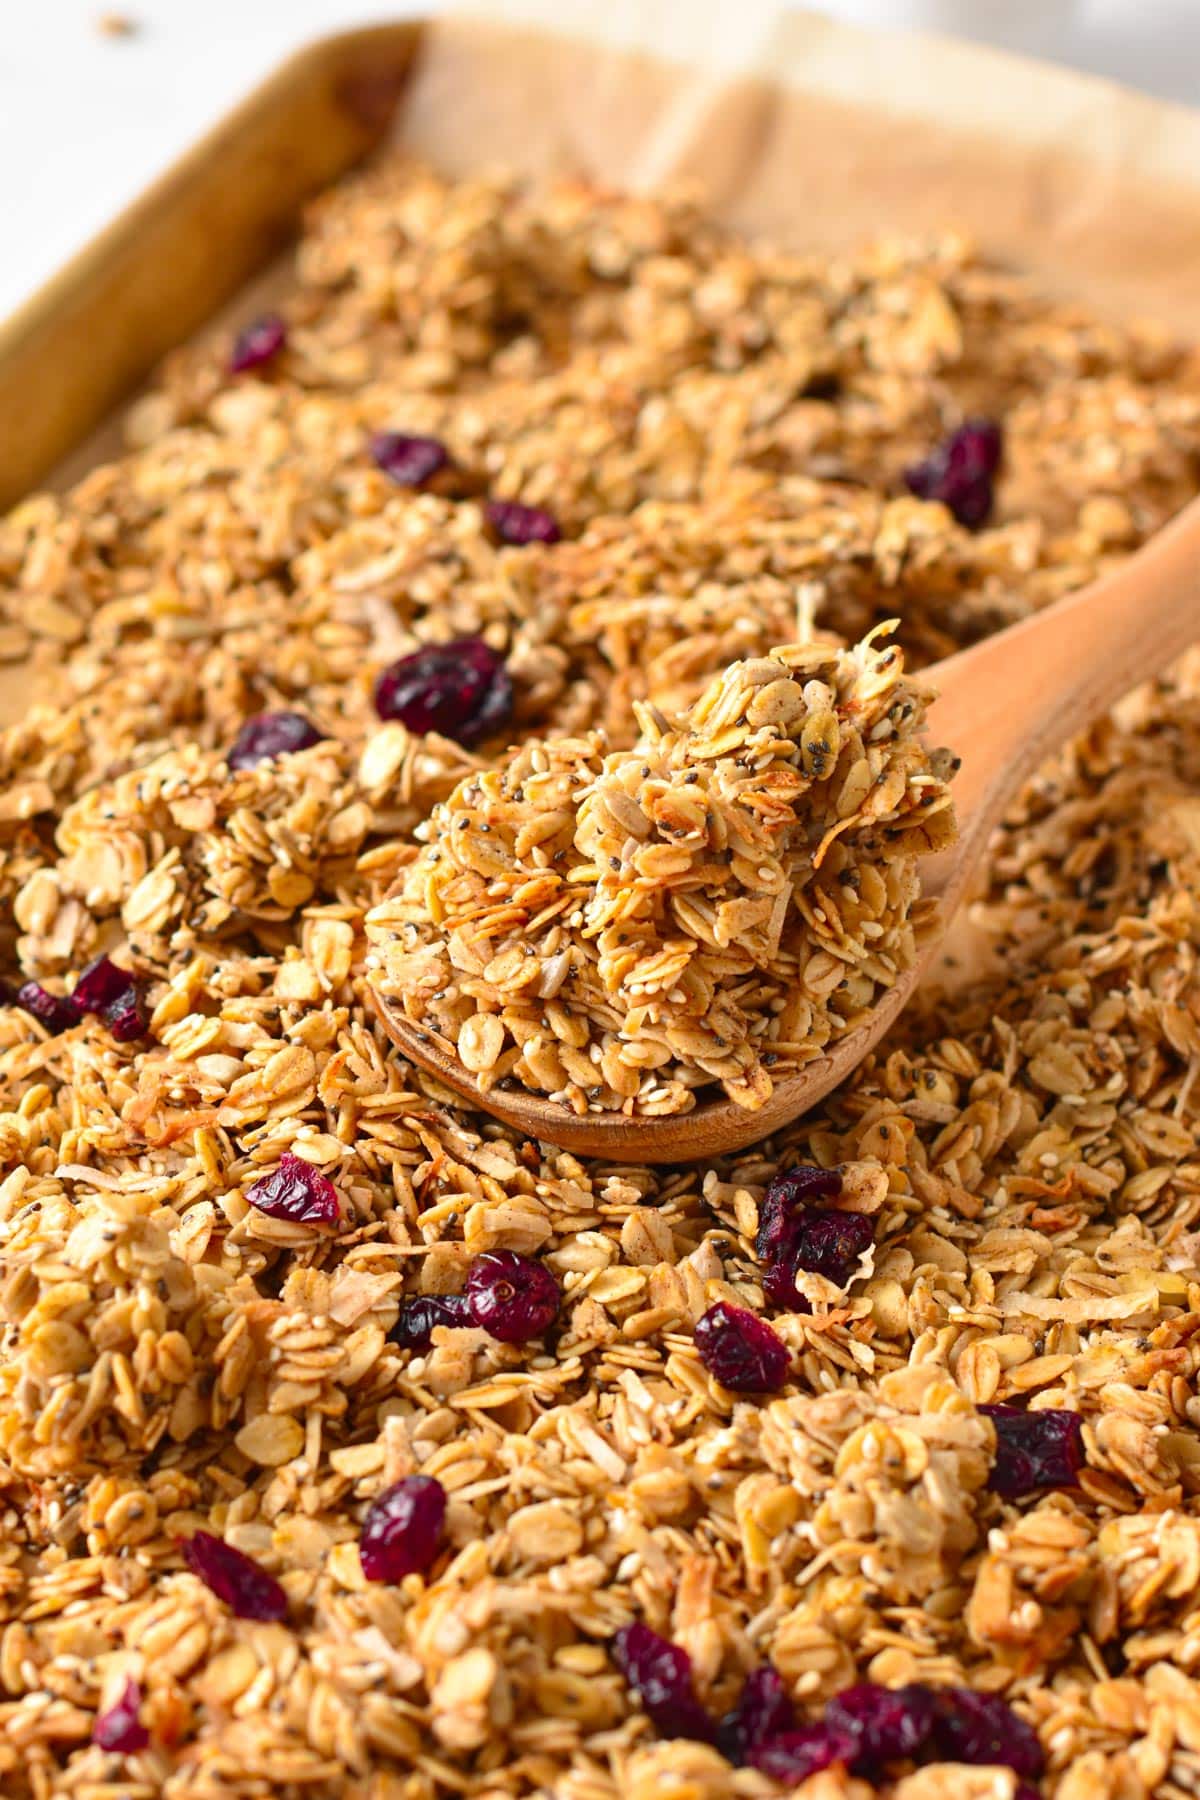 This nut-free granola recipe is the best breakfast cereal recipe if you have nut allergies.